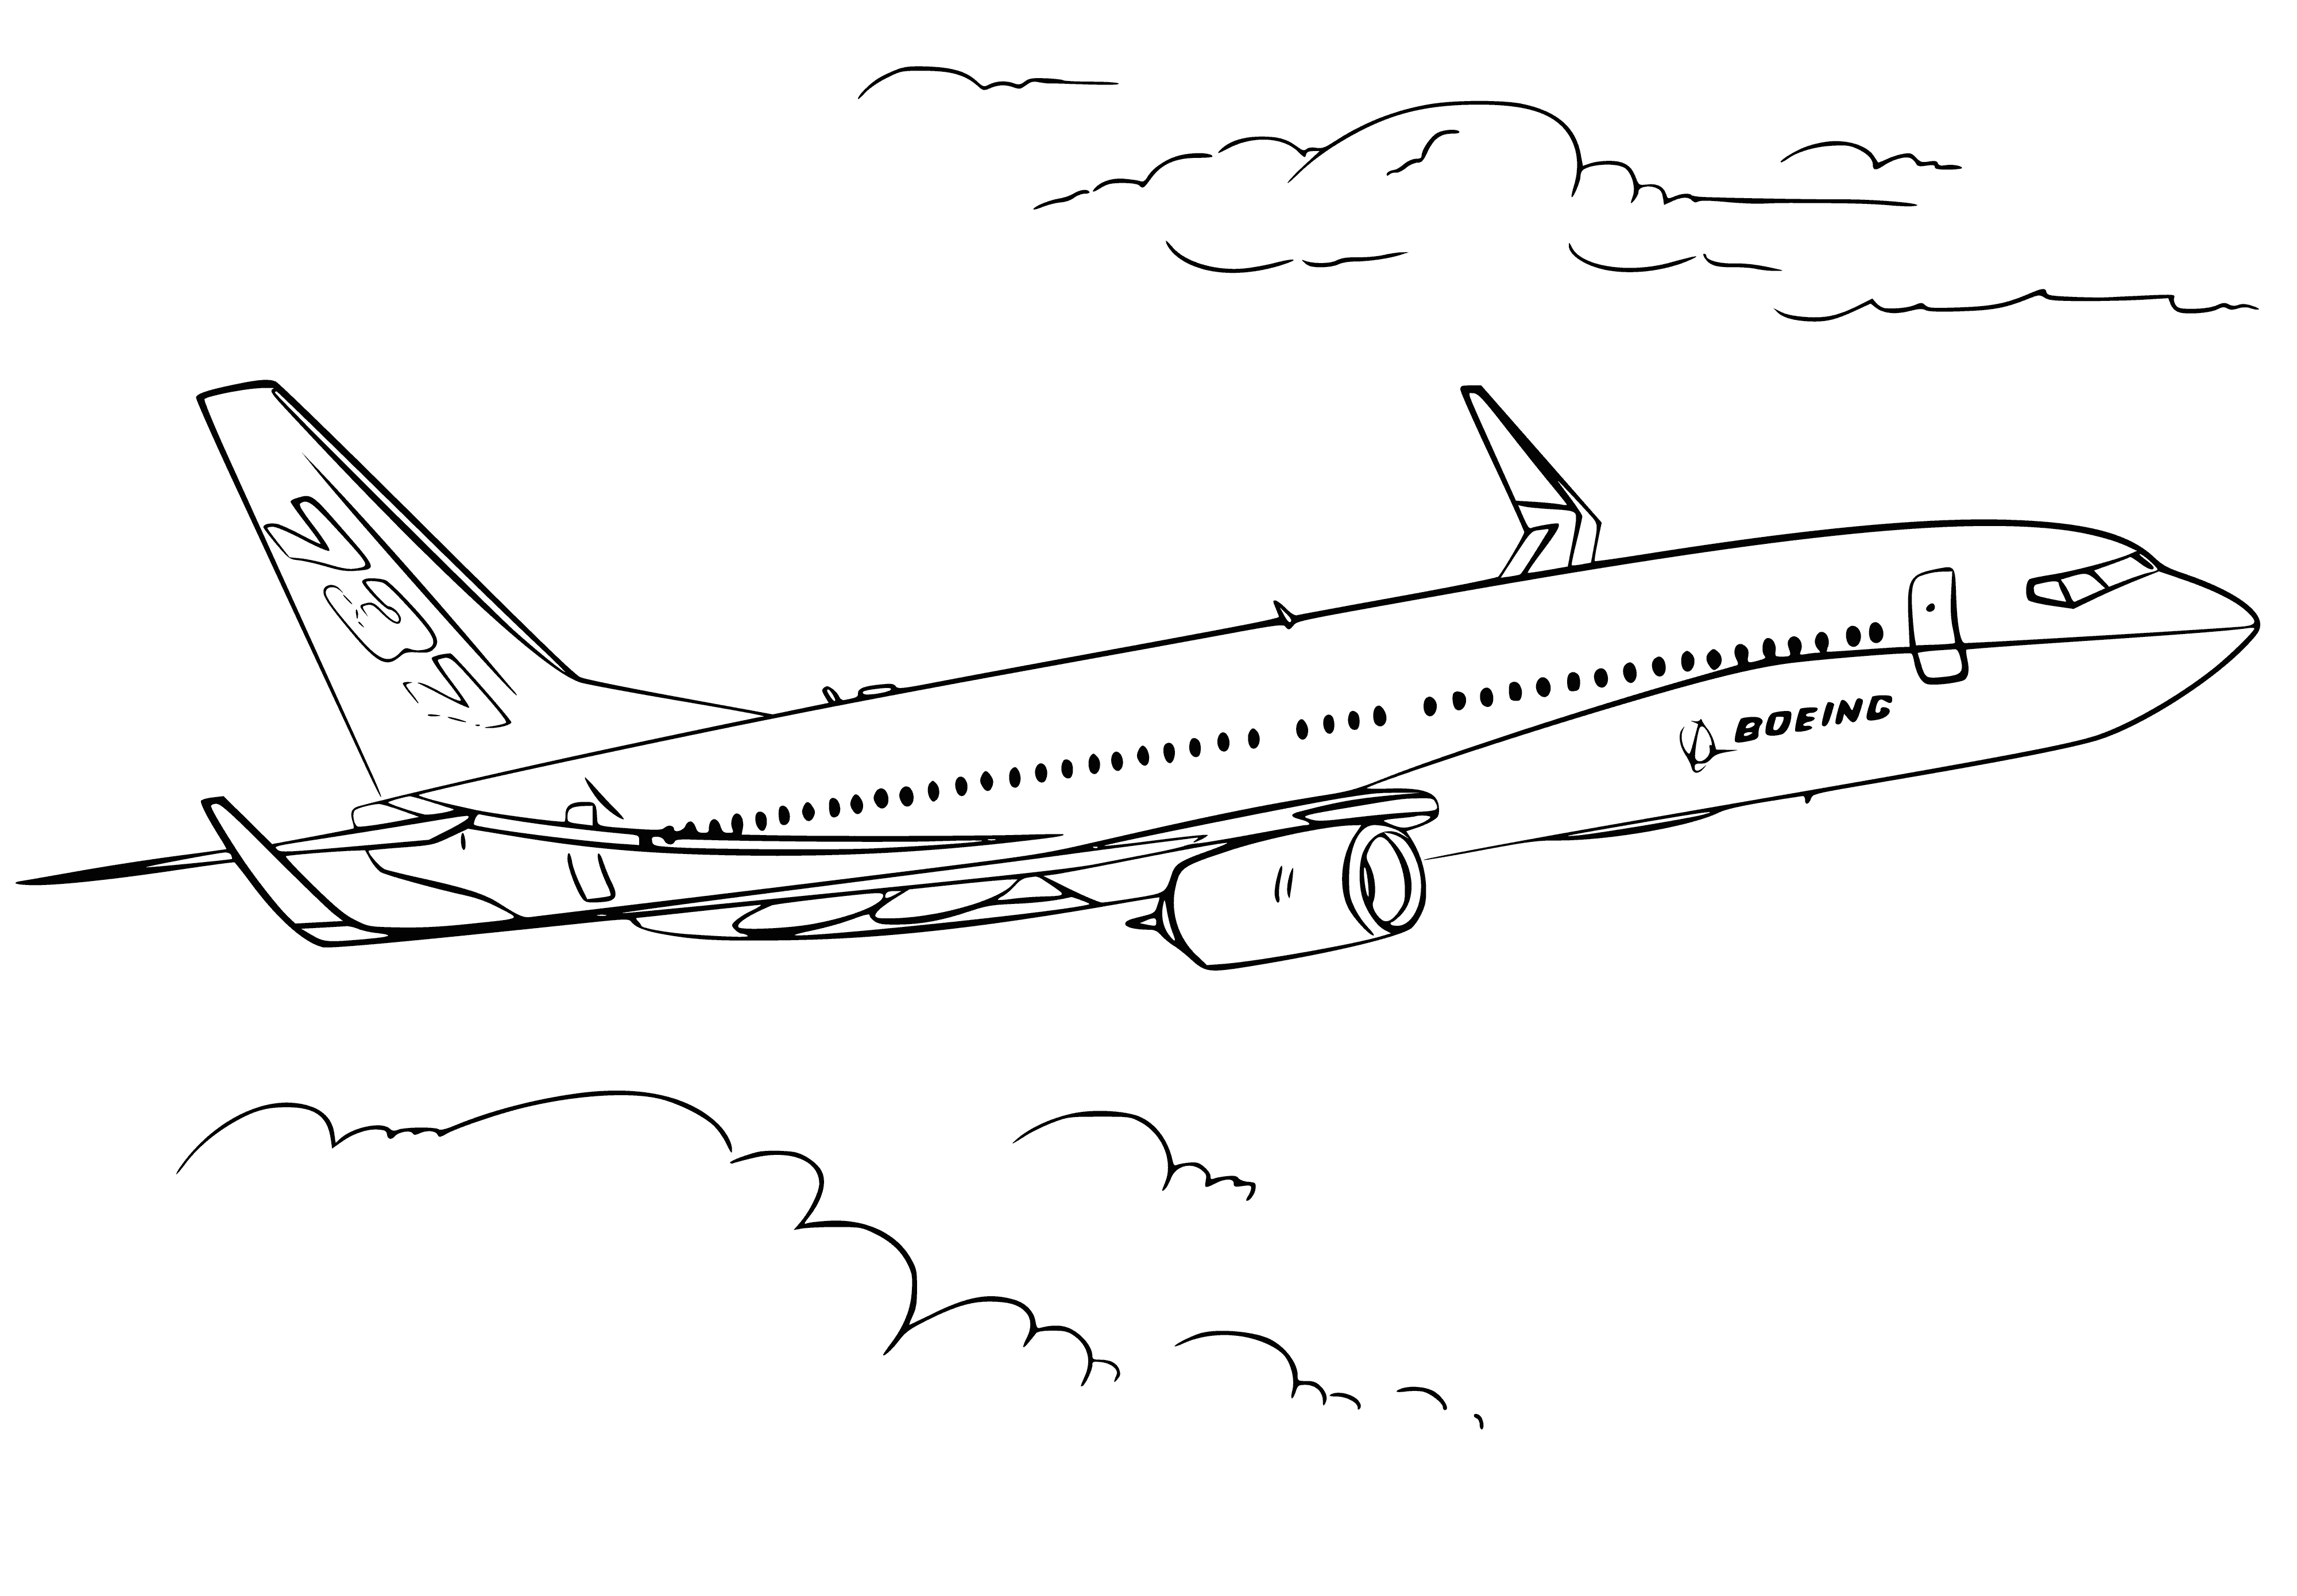 coloring page: 3 airplanes in sky: white/blue stripes, middle red nose, left has green tinge. All have landing gear down.